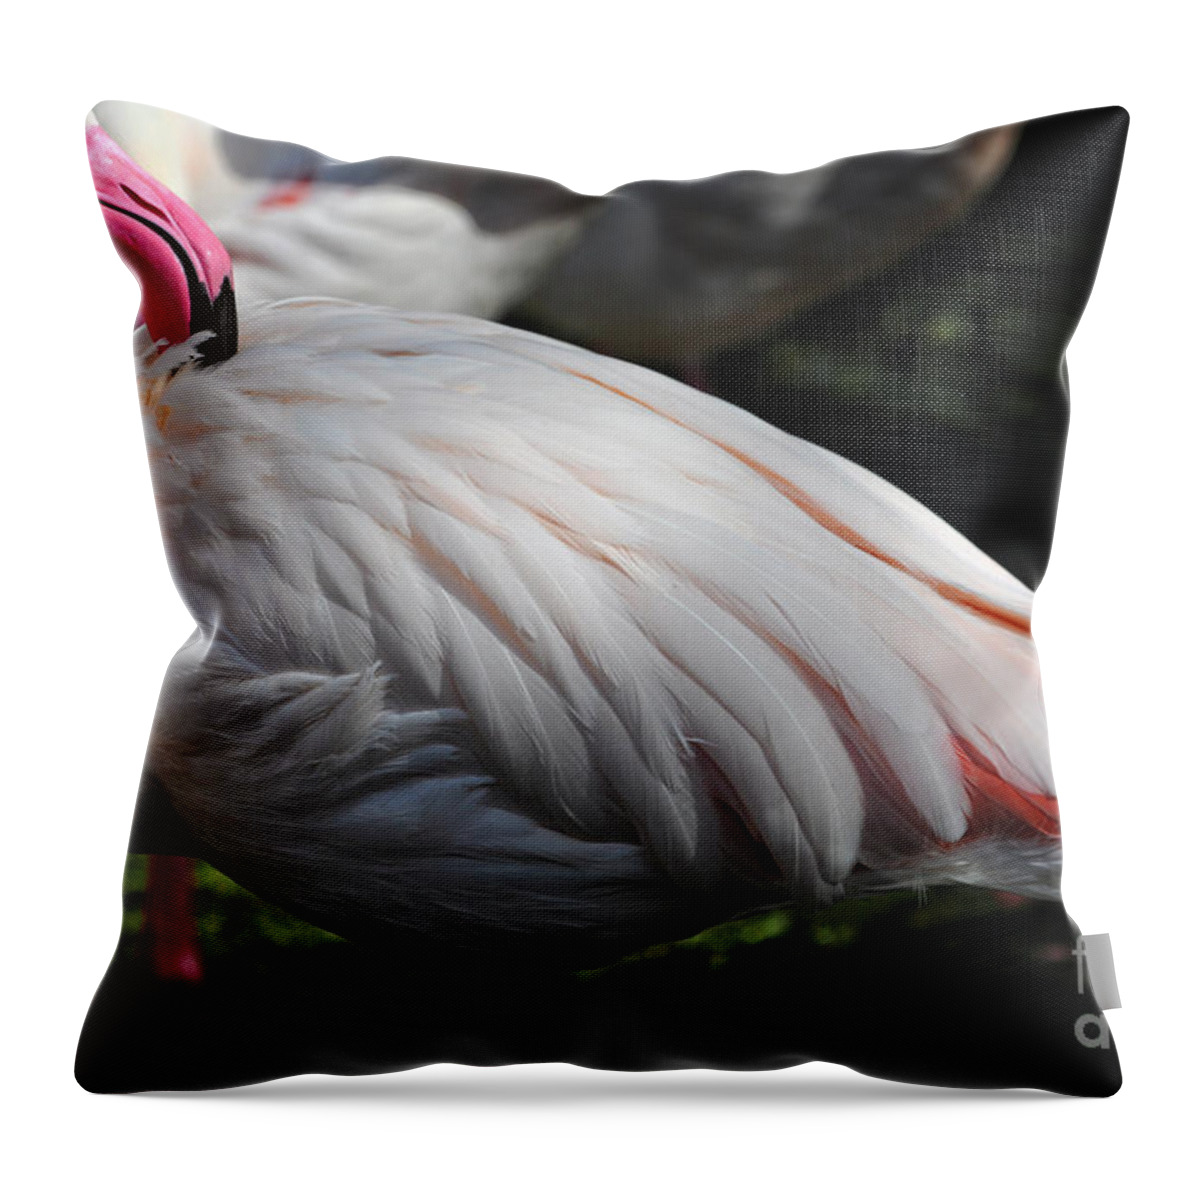 Flamingo Art Throw Pillow featuring the photograph Flamingo Beauty by Constance Woods